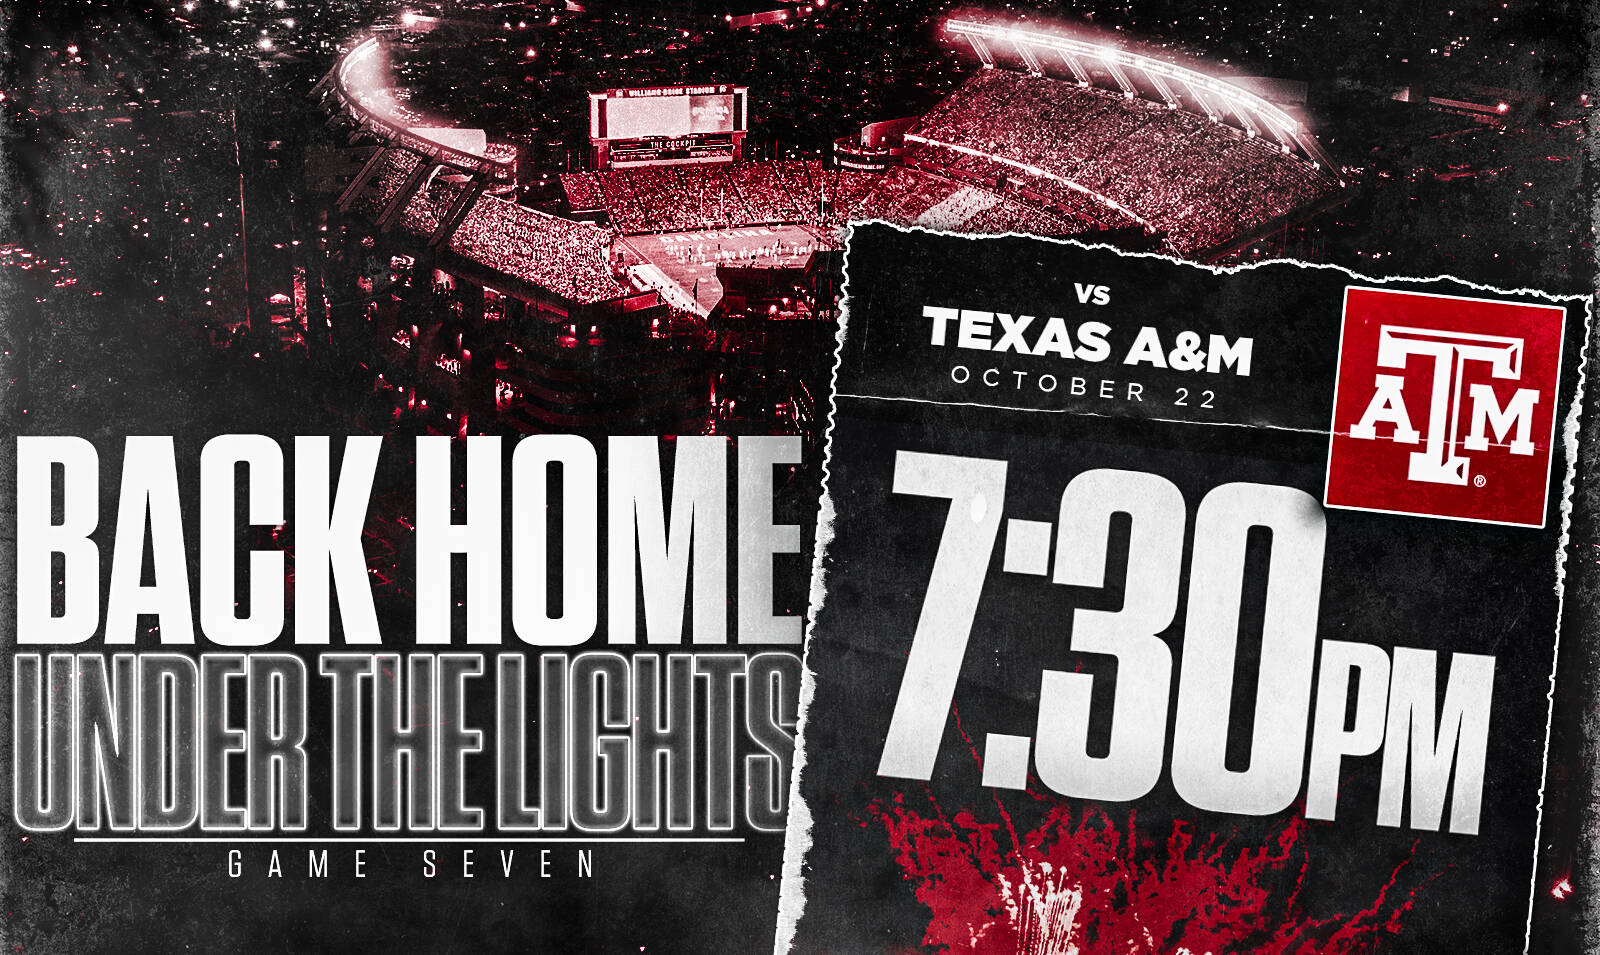 Gamecocks Host Texas A&M Under the Lights During State Fair Week